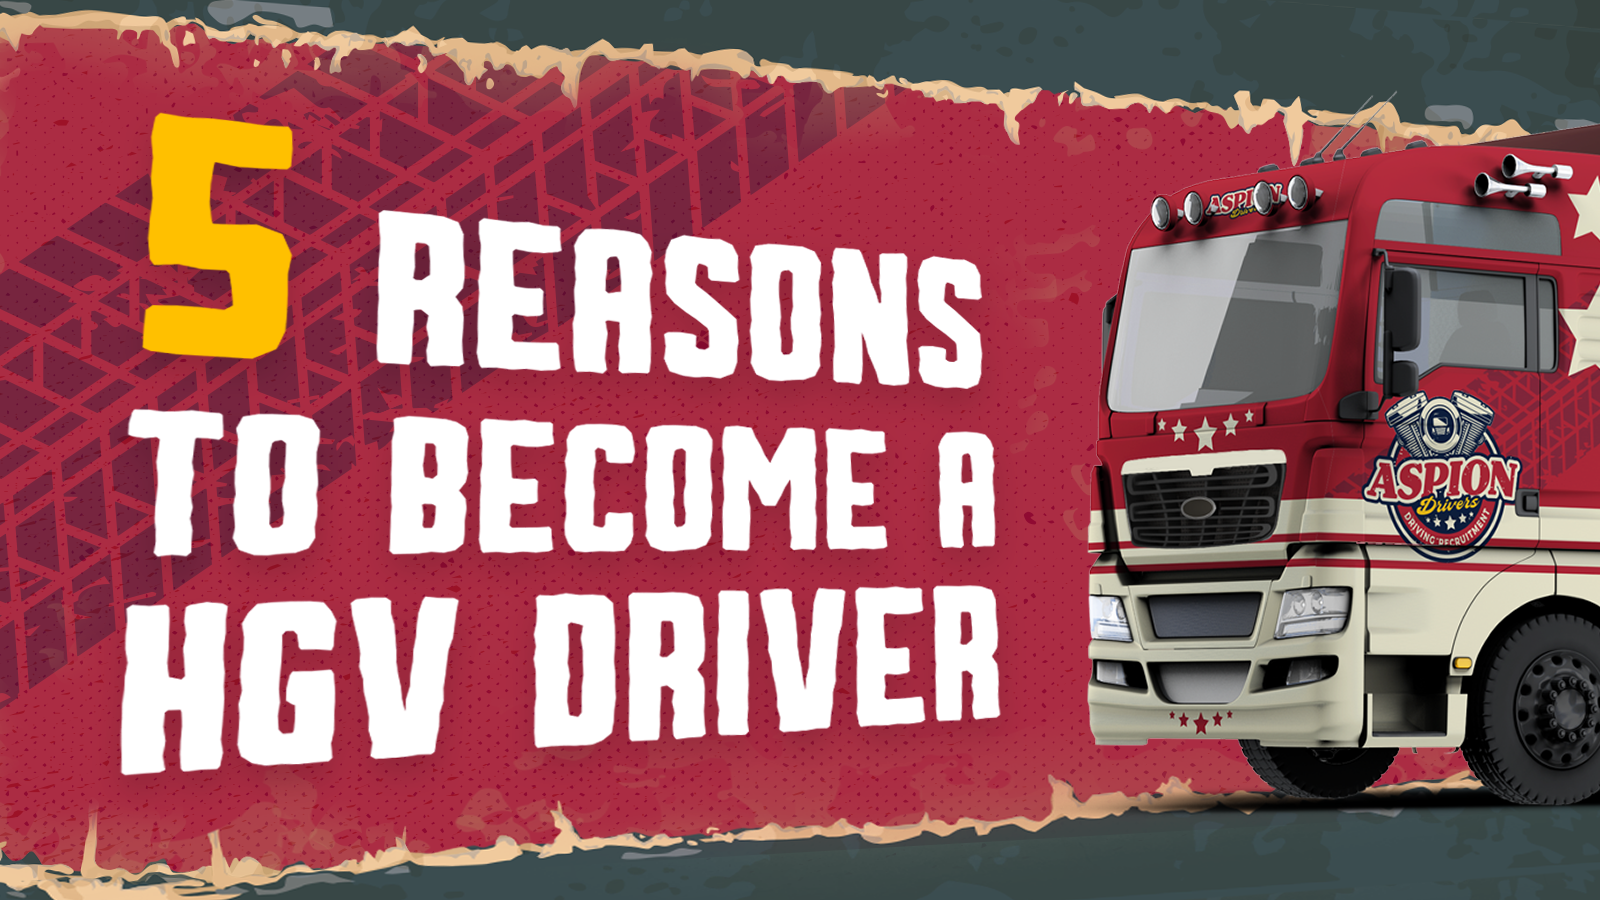 5 reasons to become a hgv driver